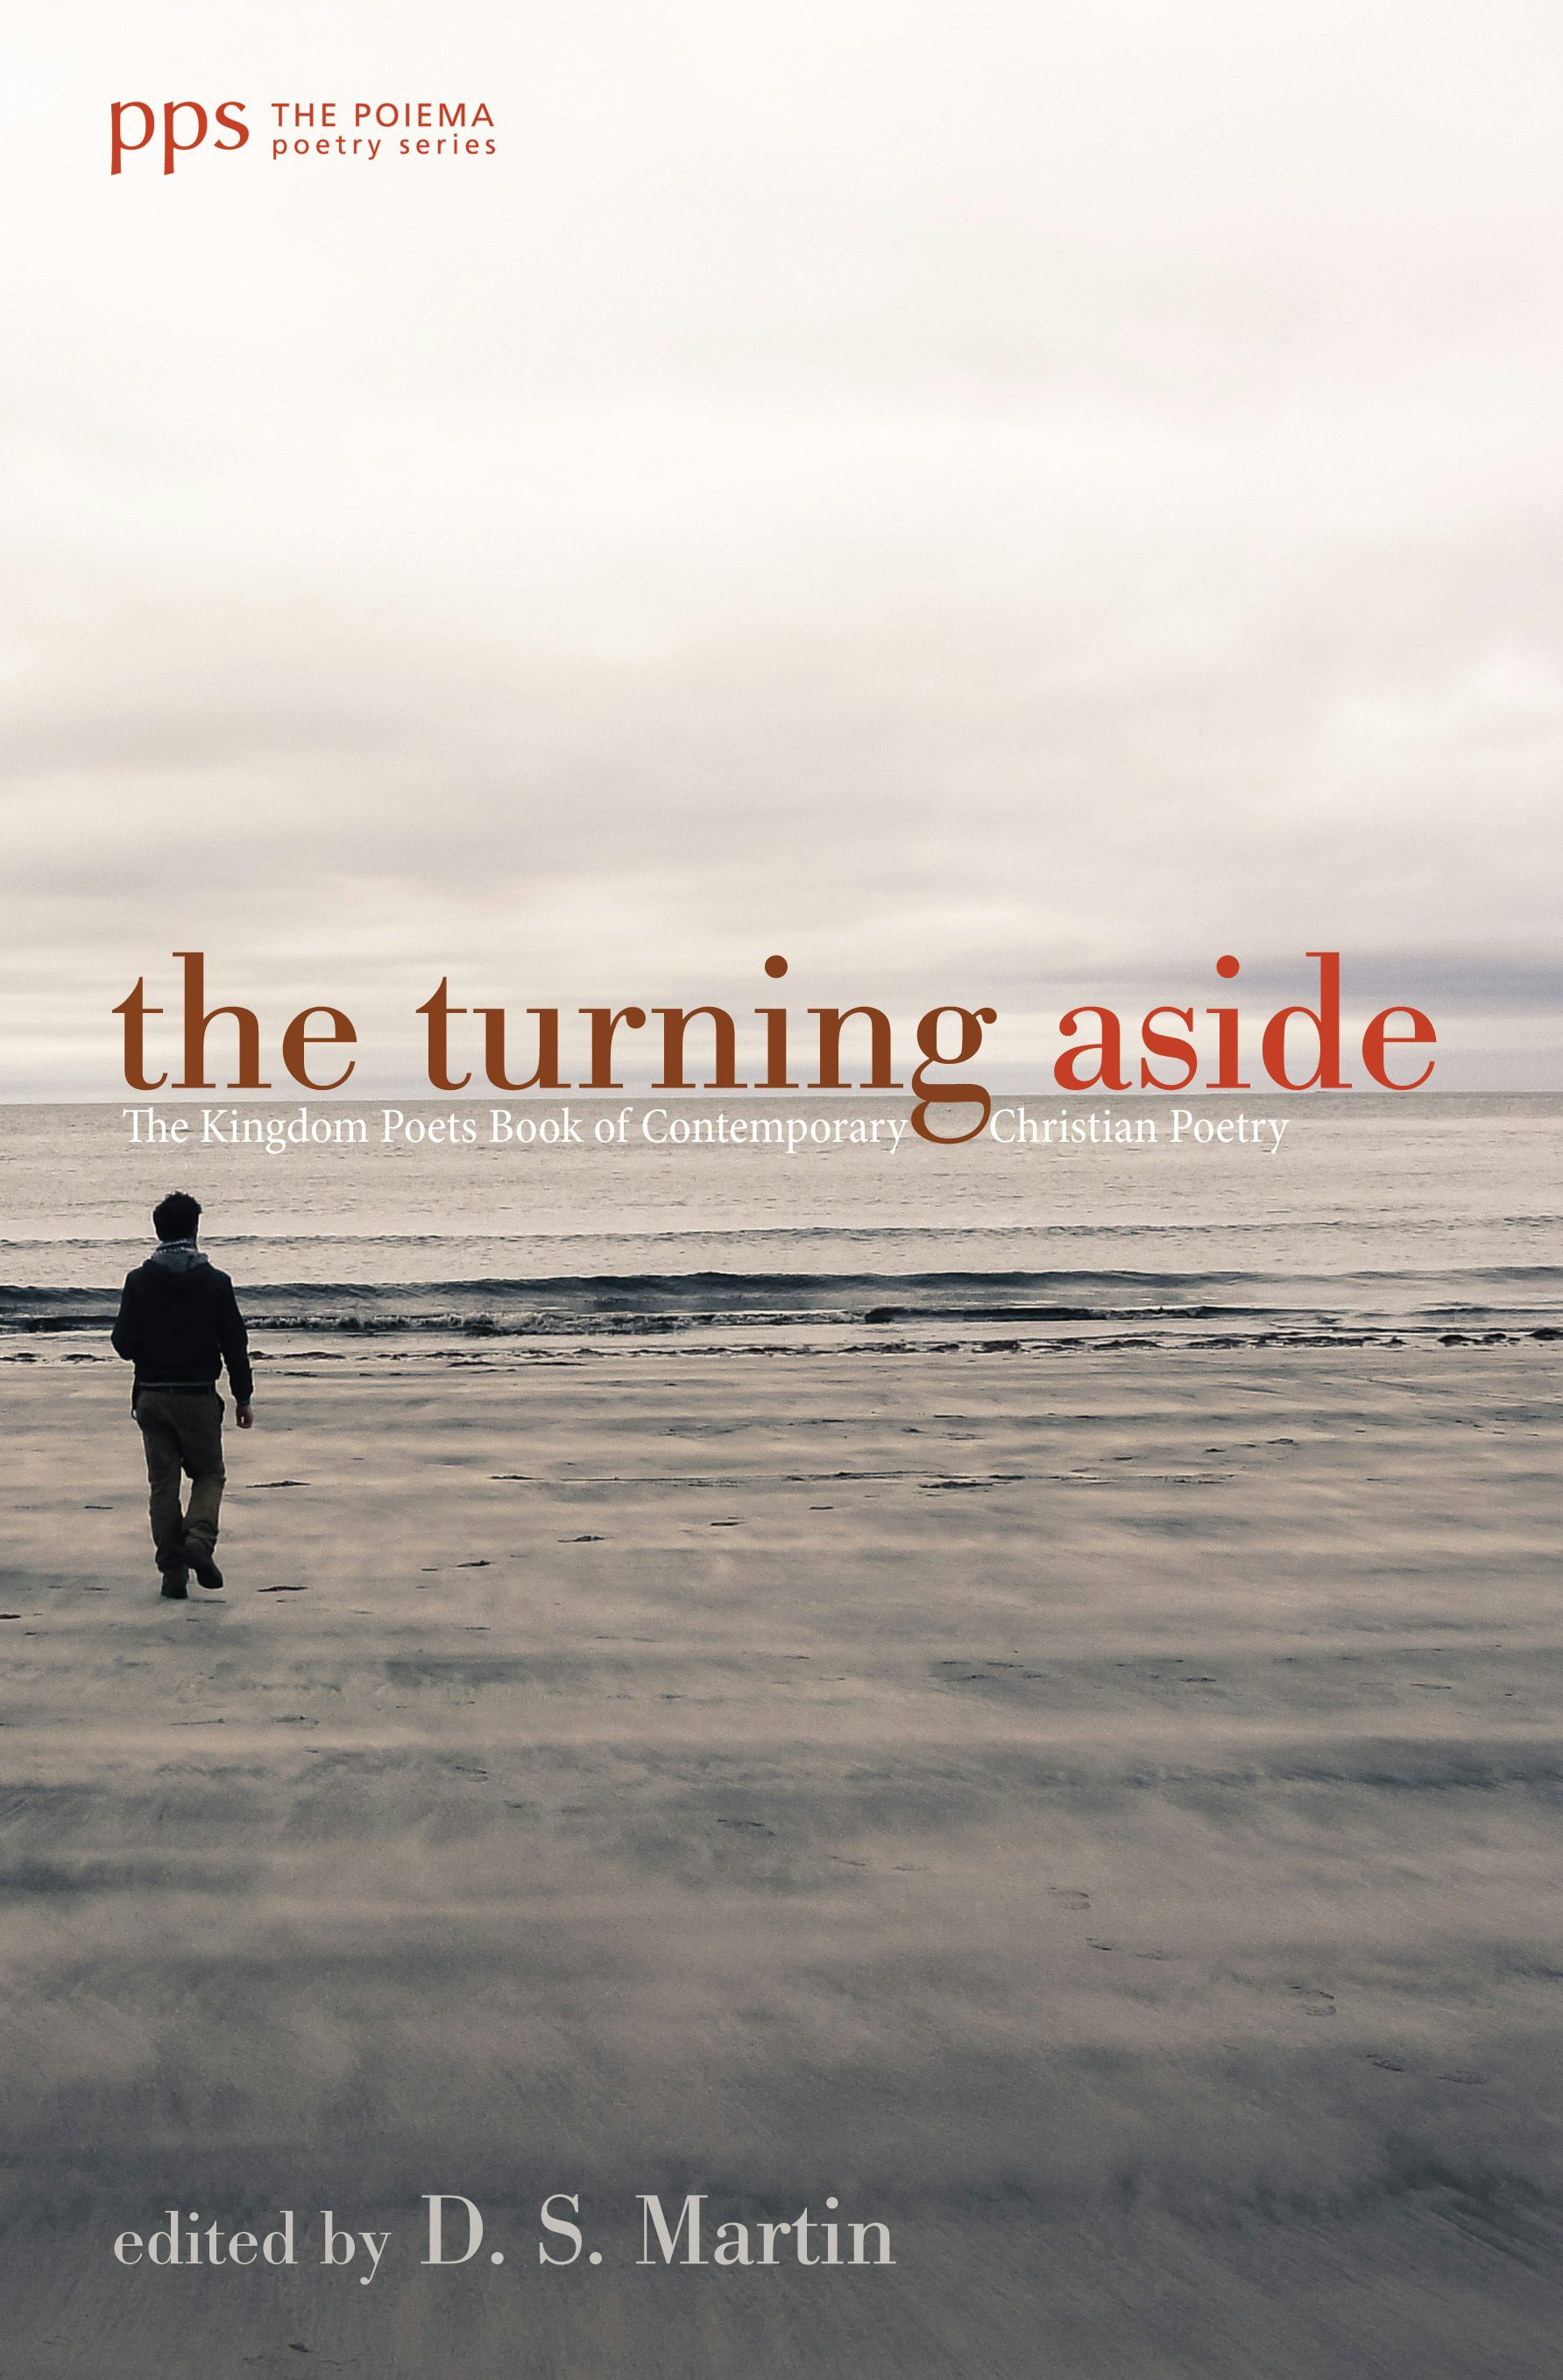 The Turning Aside by D.S. Martin